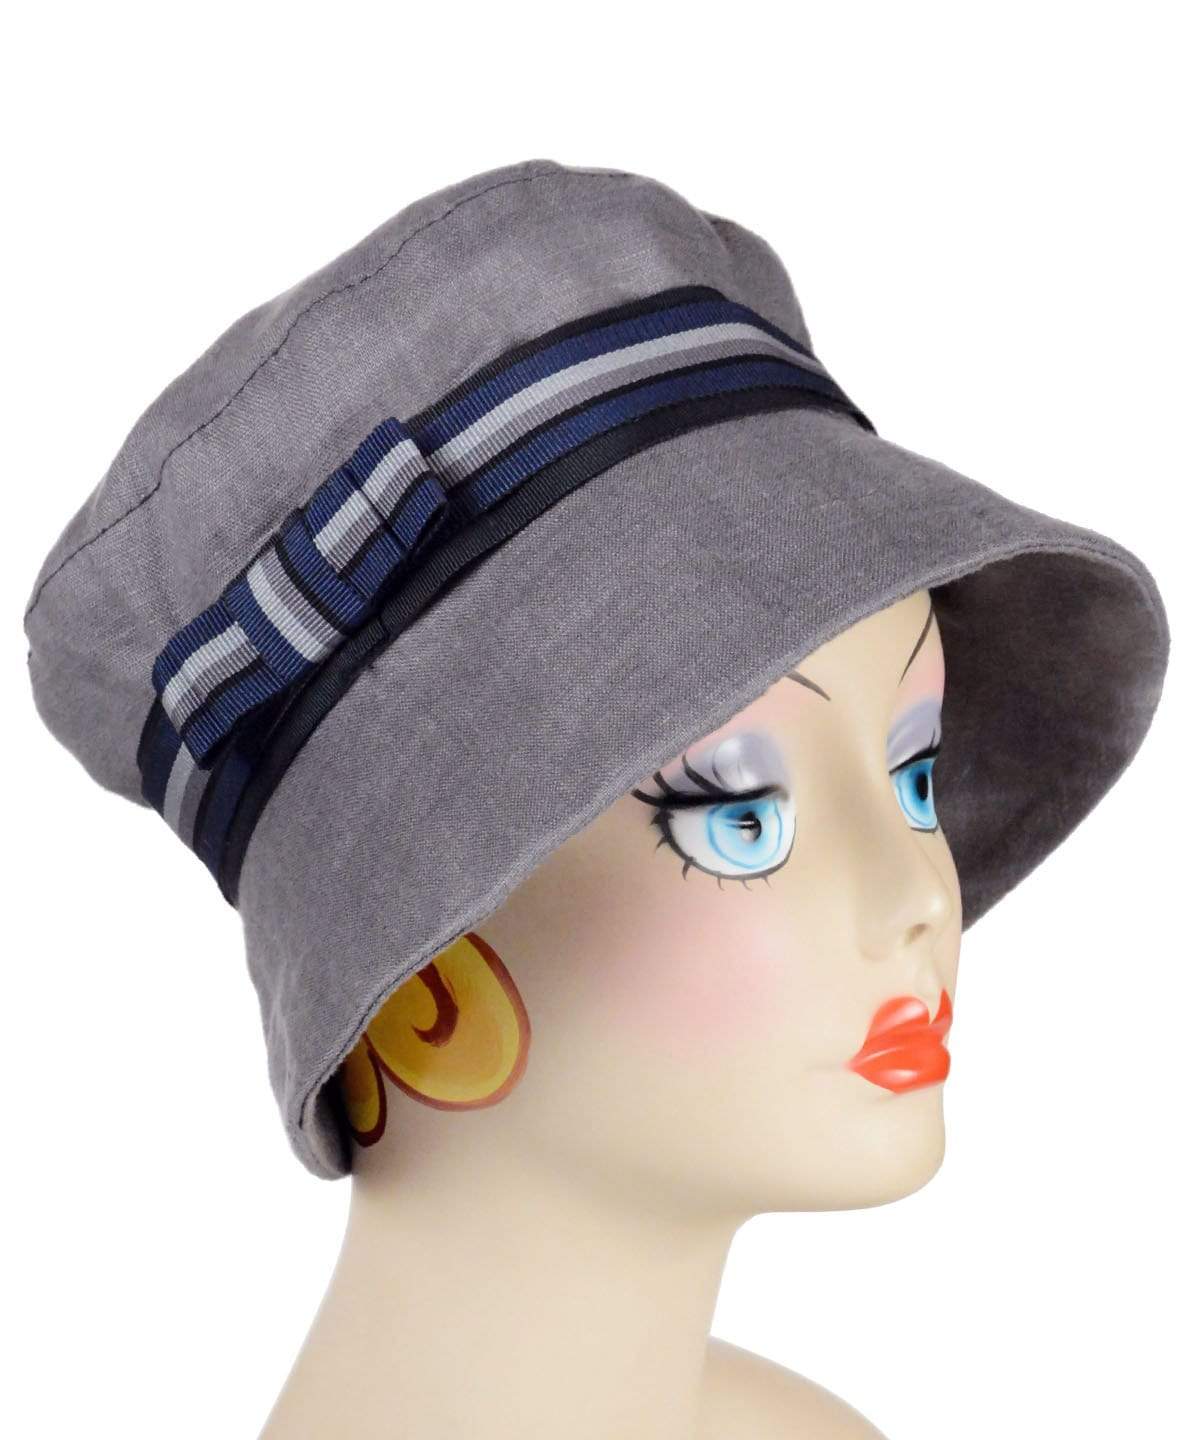  Molly Hat Bucket Style Hat in Linen with Multi-Stripe Blue and Gray  Grosgrain Band and Bow | Handmade by Pandemonium Millinery | Seattle WA USA